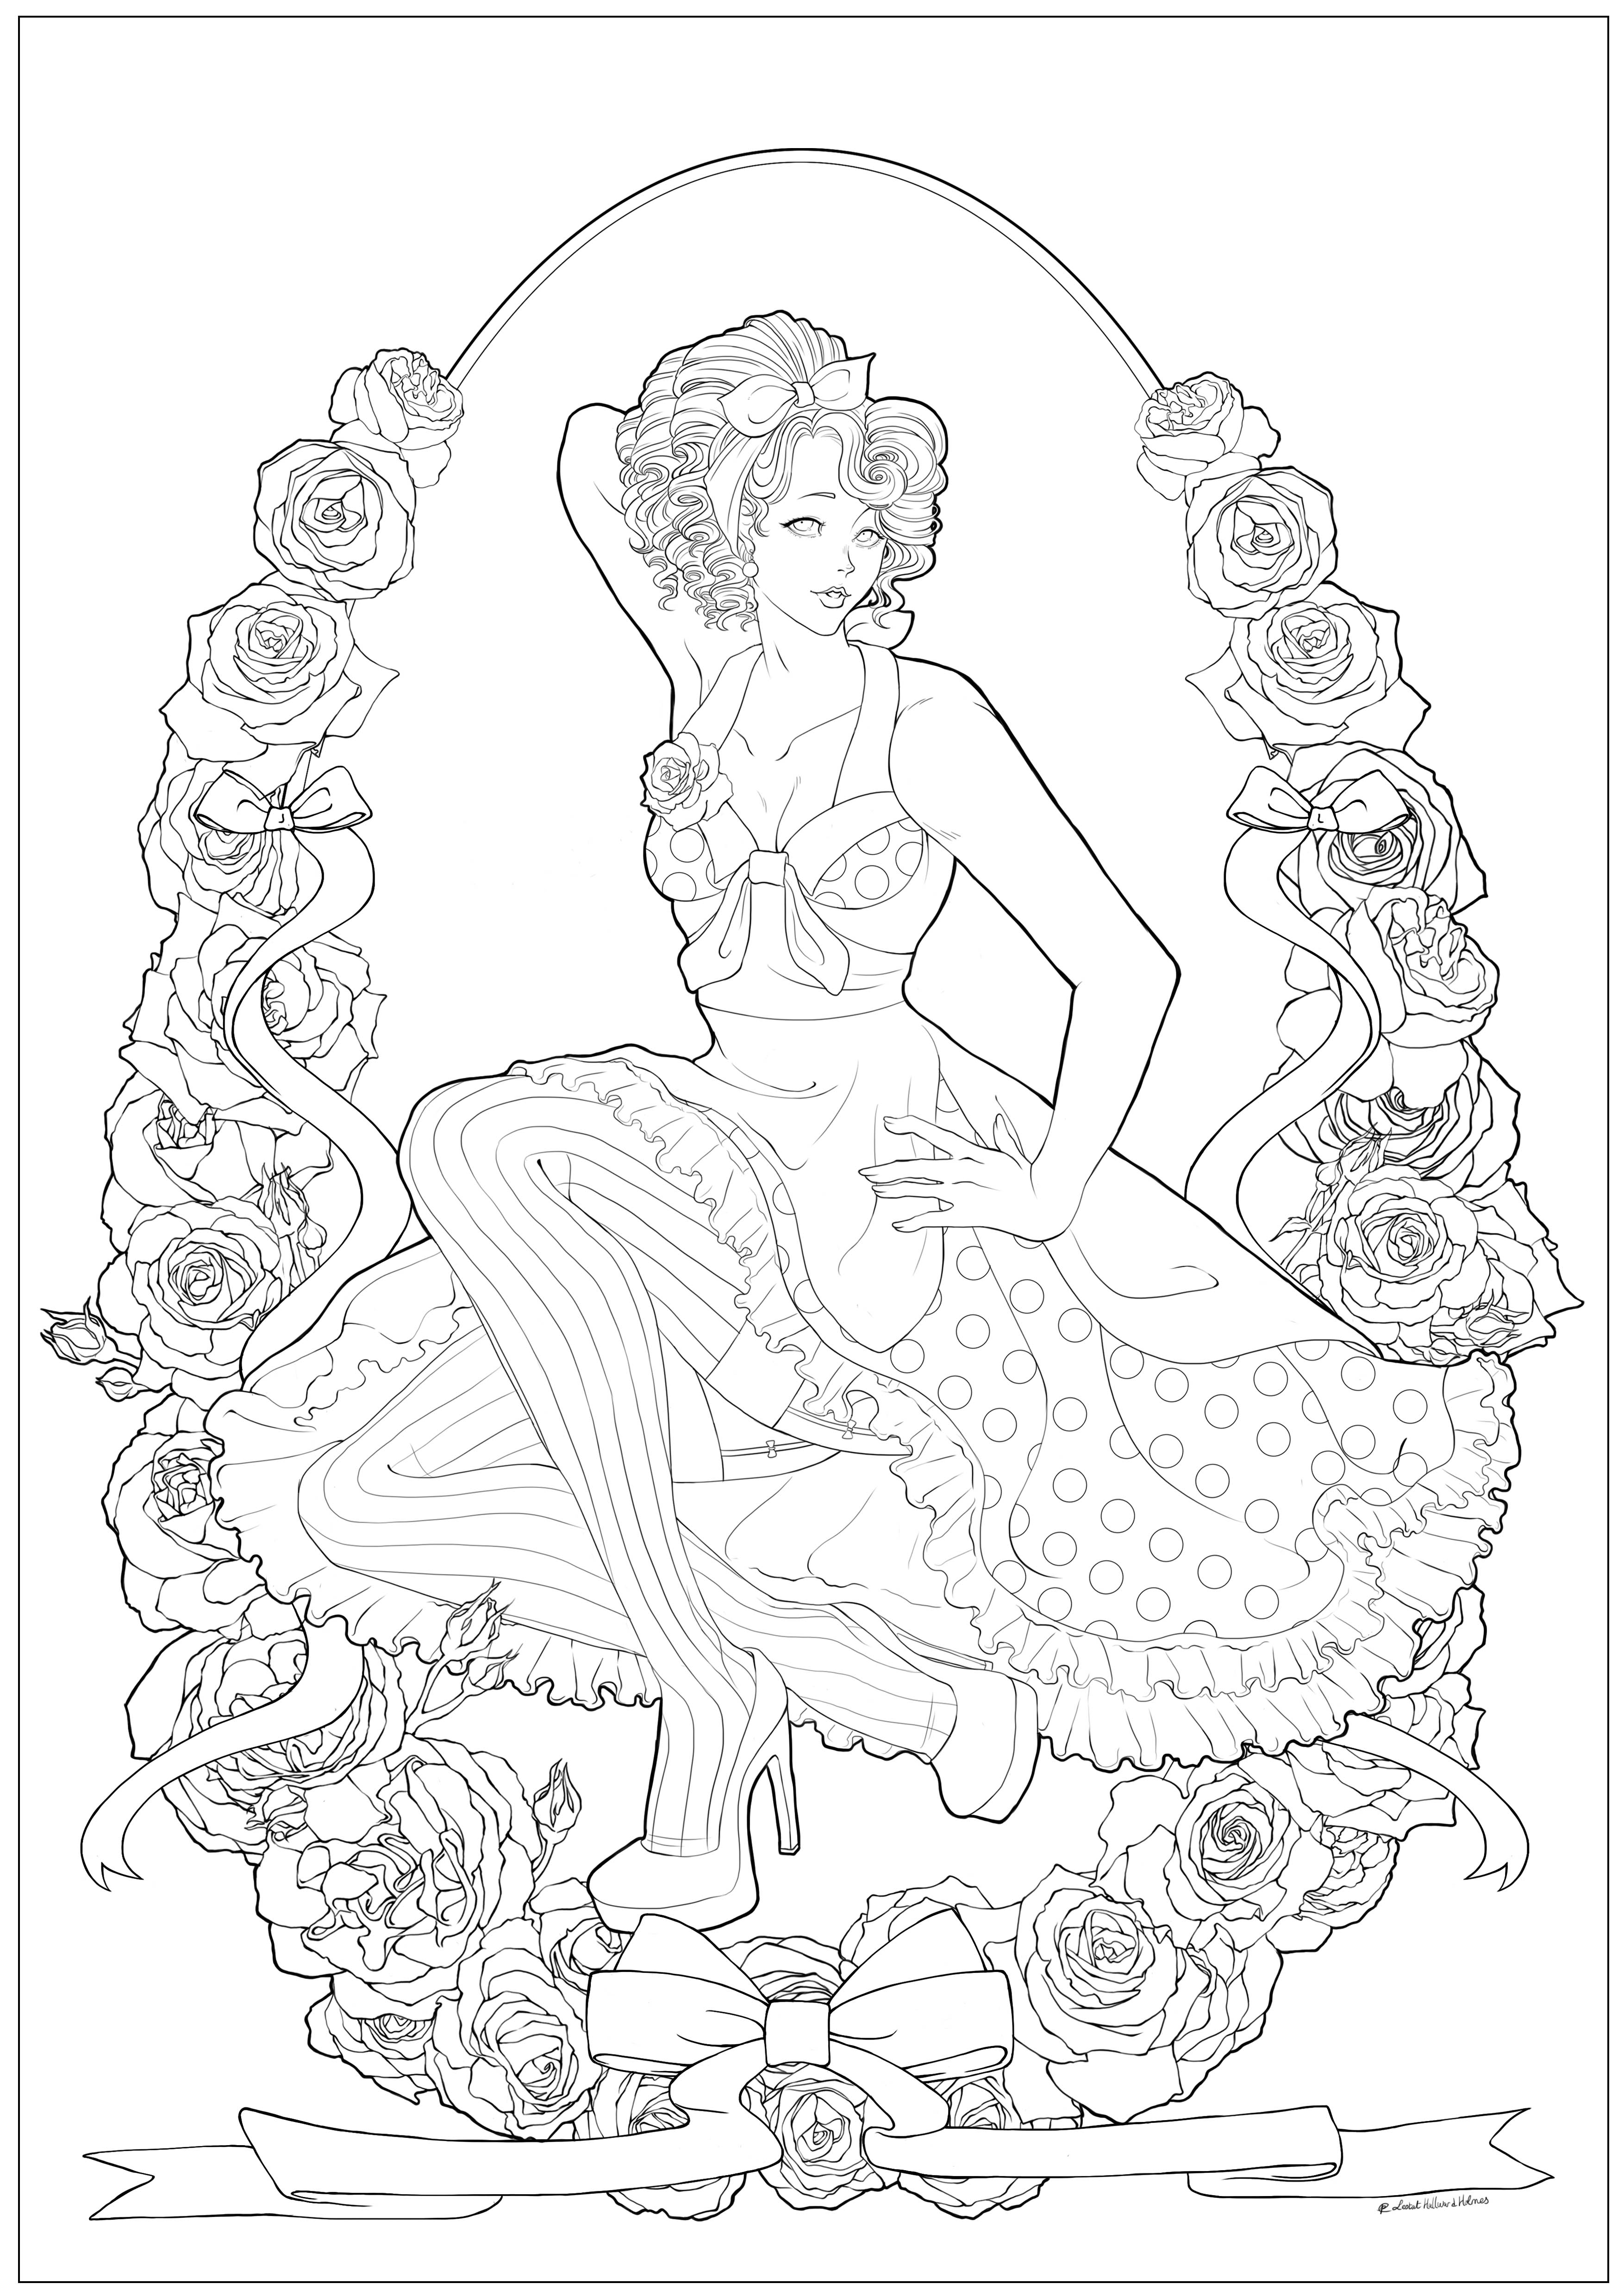 Retro Coloring Pages - Coloring Home